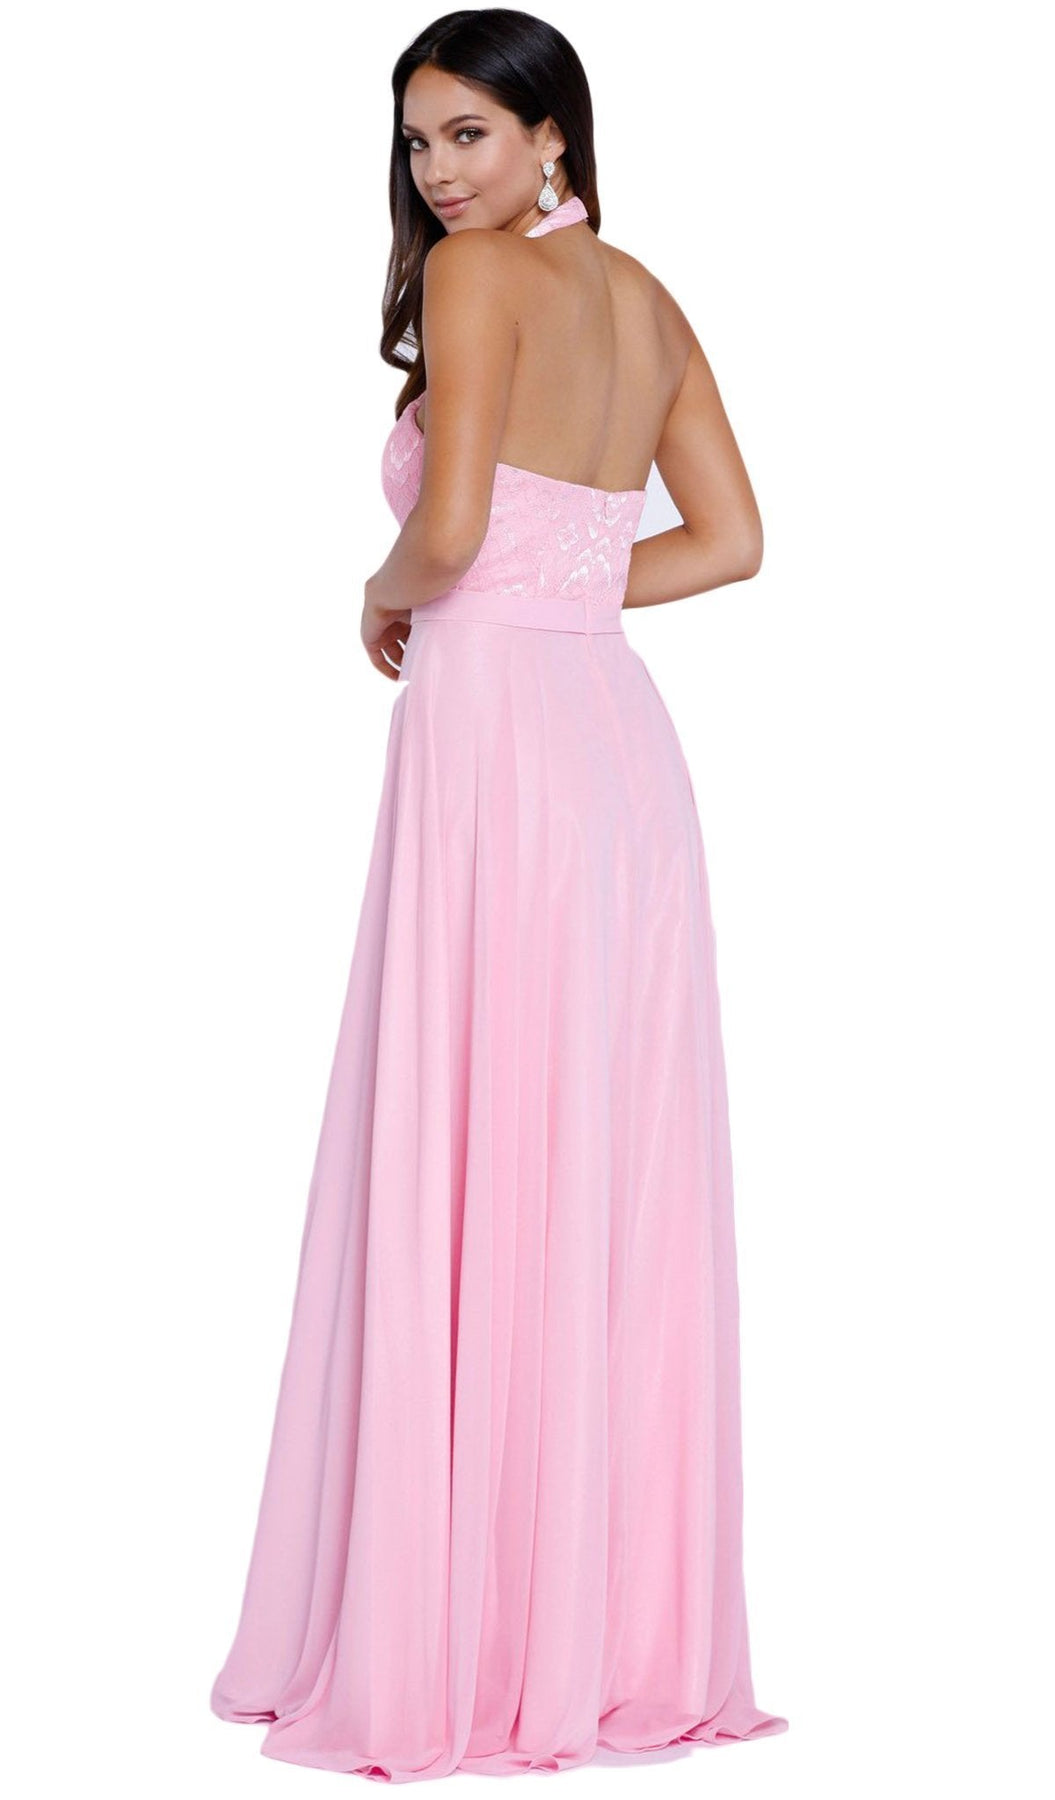 Nox Anabel - 8233 Halter Illusion Laced Bodice Long Evening Gown Special Occasion Dress XS / Baby Pink